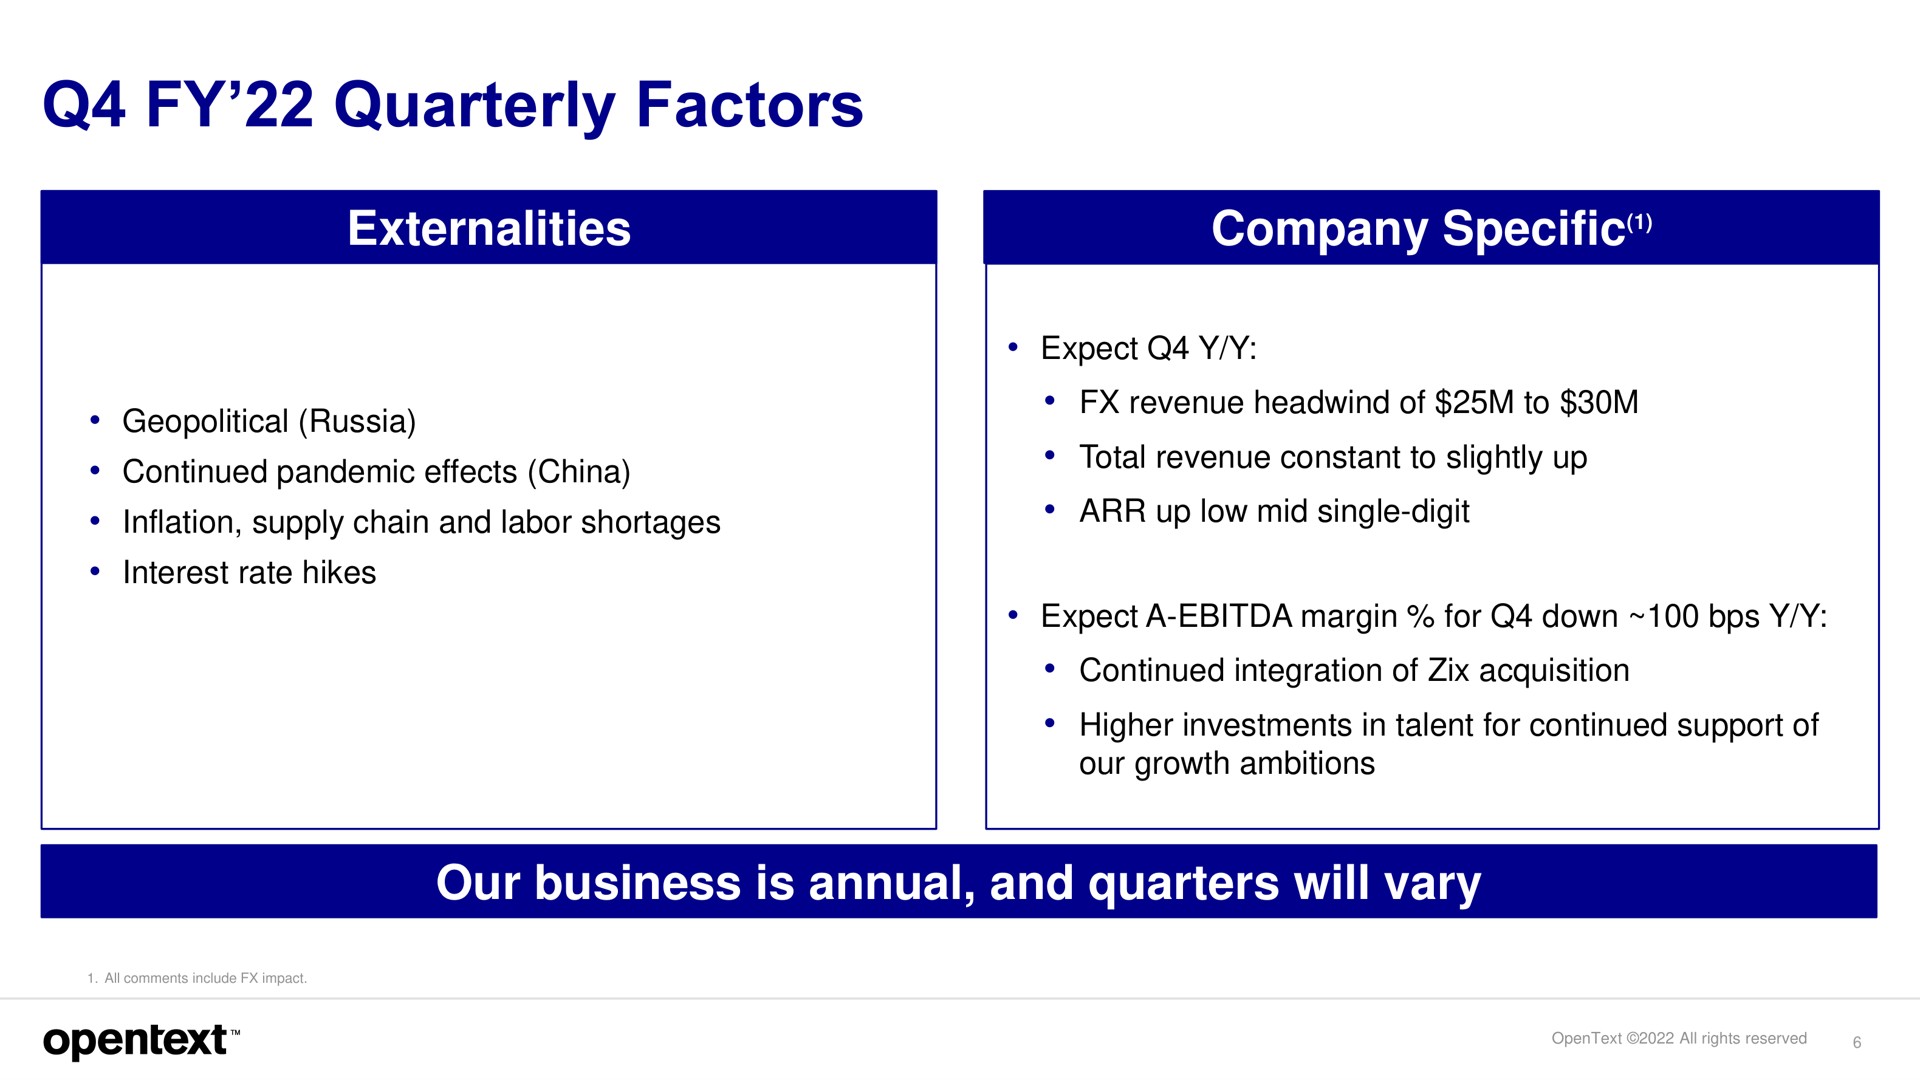 quarterly factors externalities company specific our business is annual and quarters will vary growth ambitions | OpenText